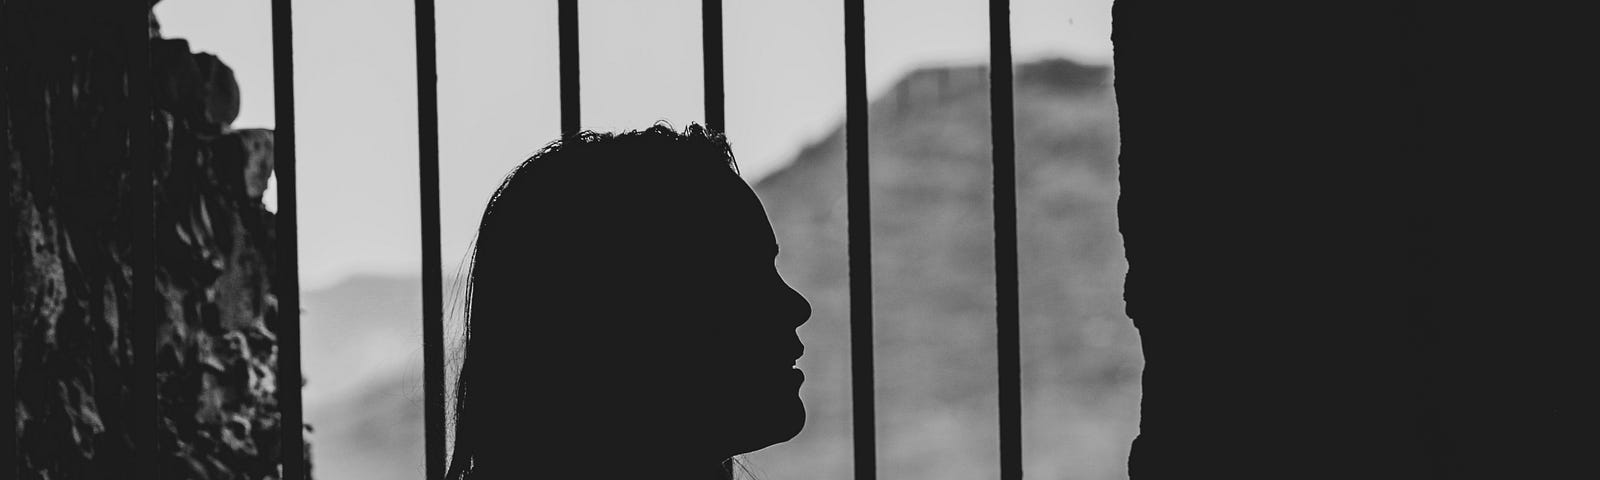 Silouette of woman standing in front of prison bars.